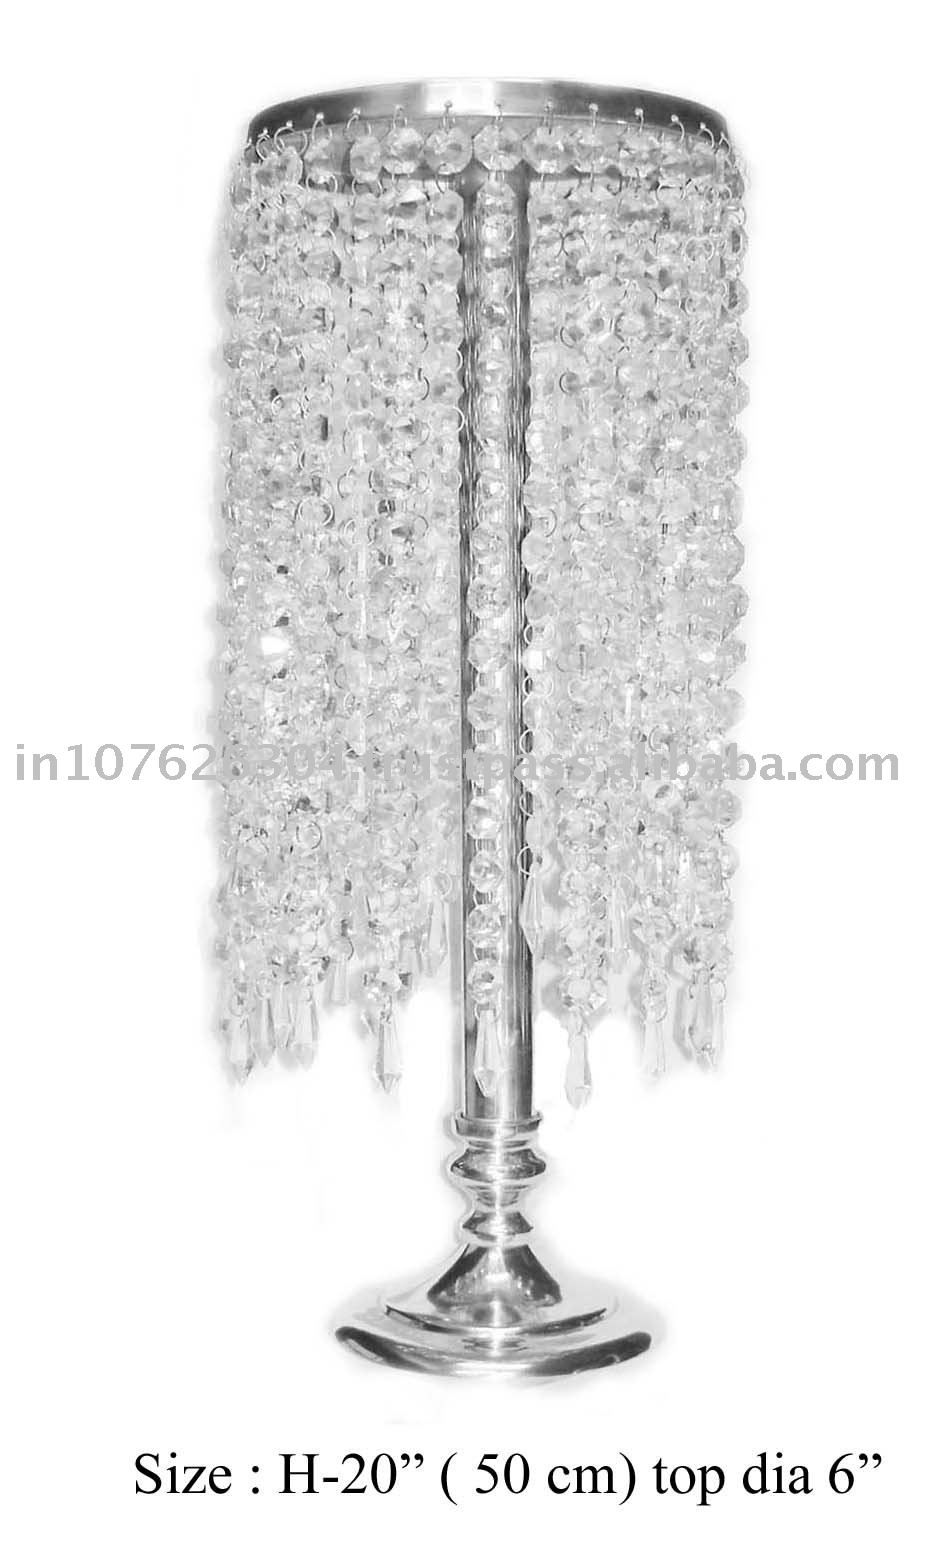 Table Chandelier New For Your Home Decoration Ideas With Table Pertaining To Table Chandeliers (View 3 of 15)